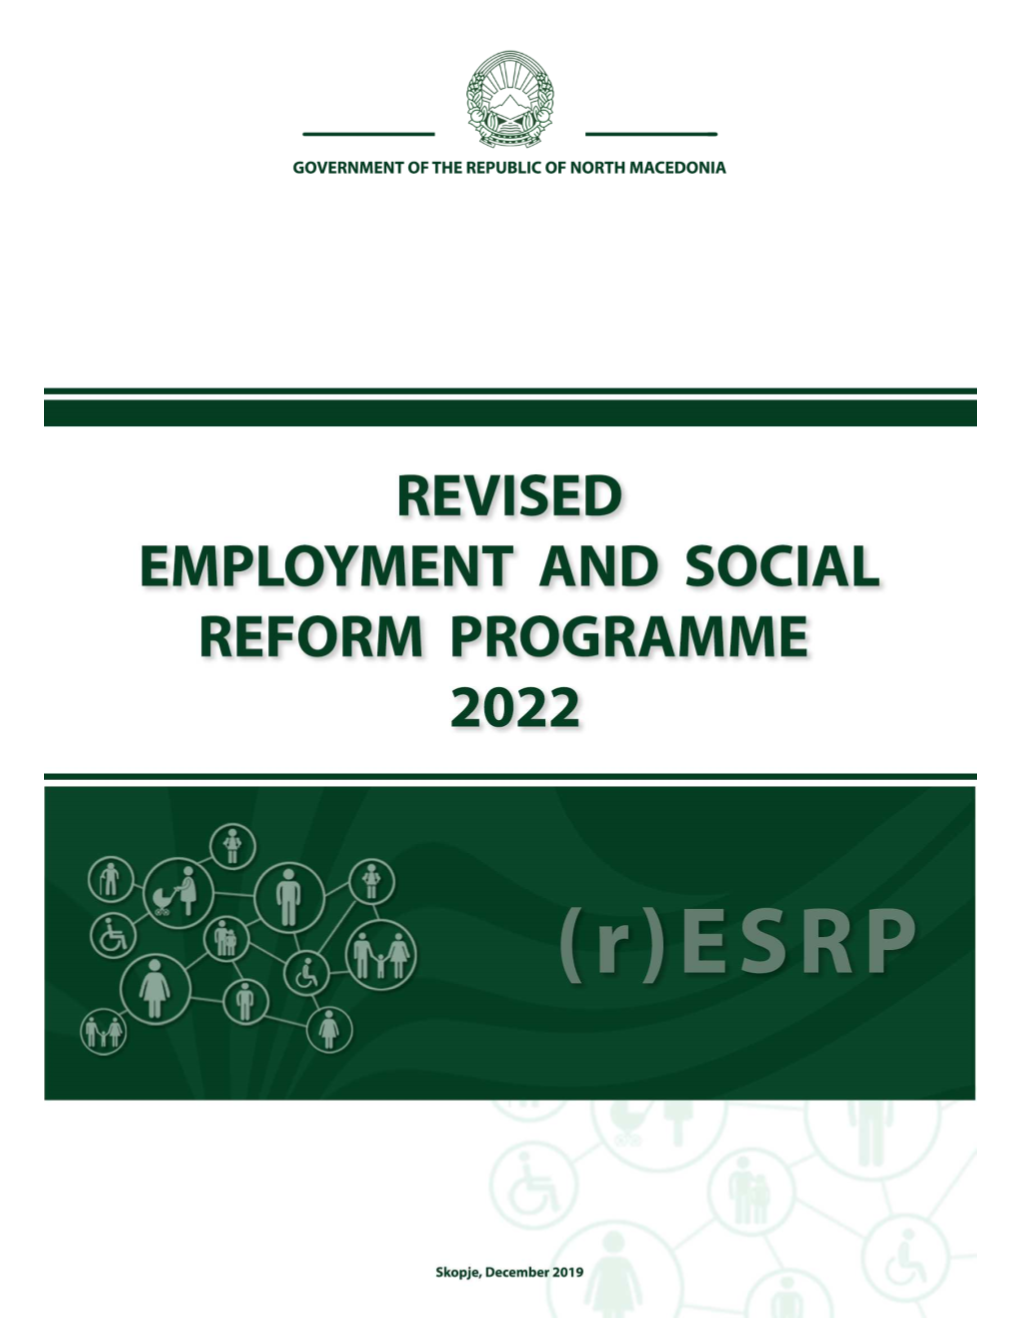 Revised Employment and Social Reform Programme 2022